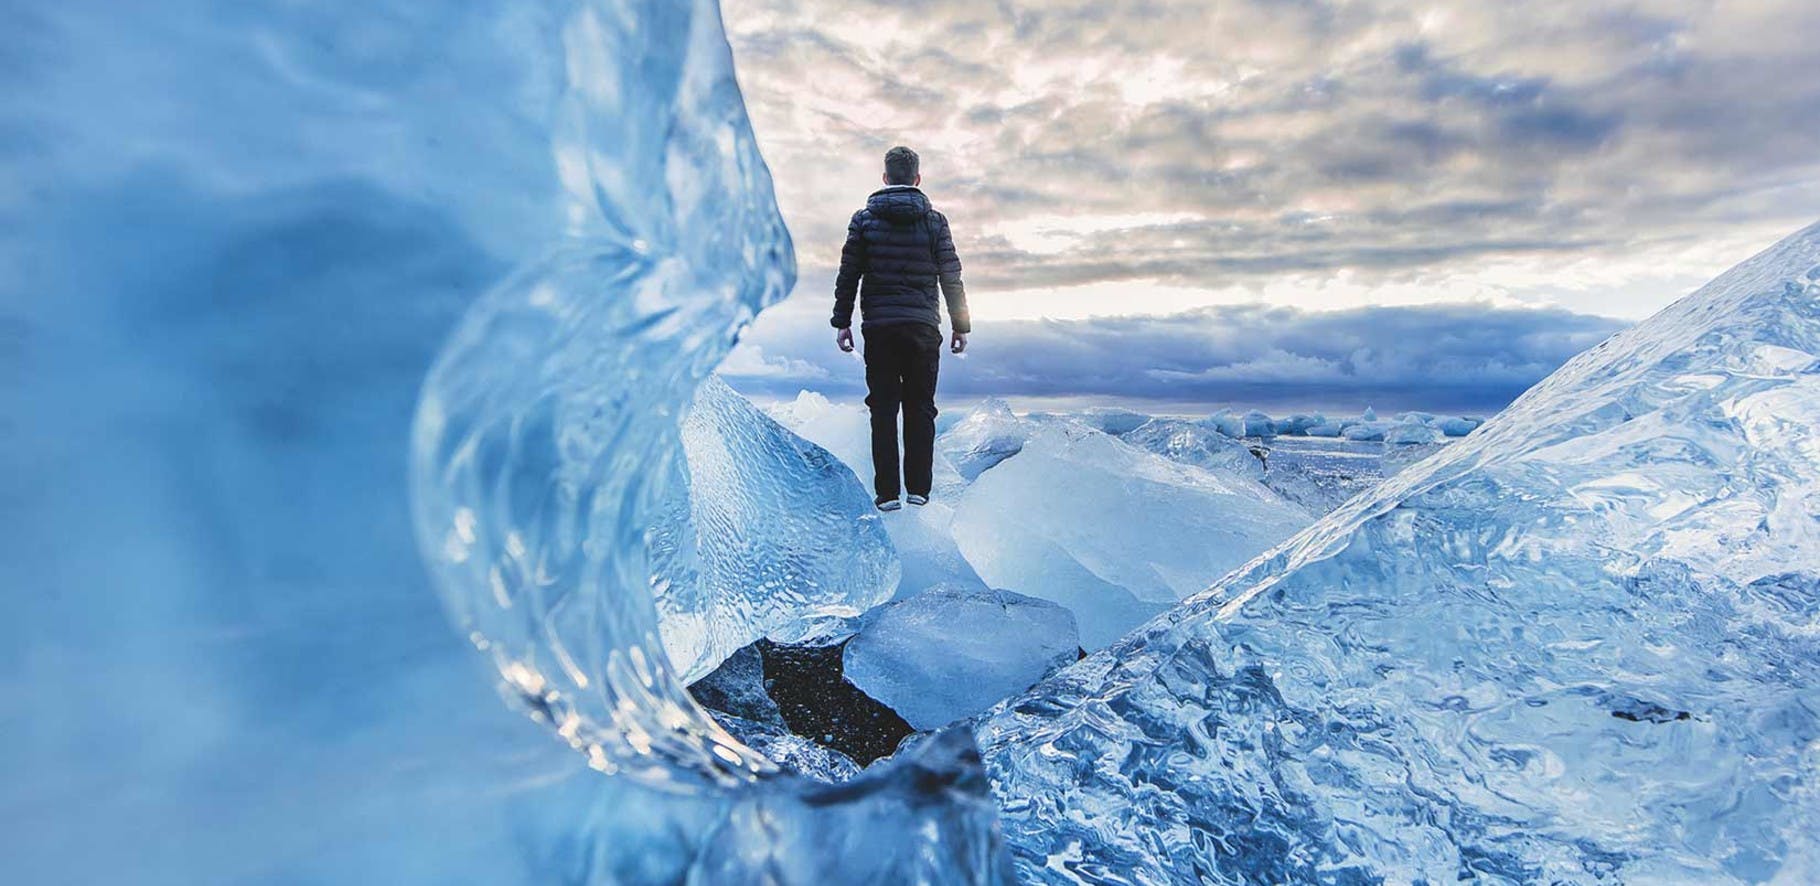 close up image looking through glacier ice, with a man standing in the background looking out over the vast glacier